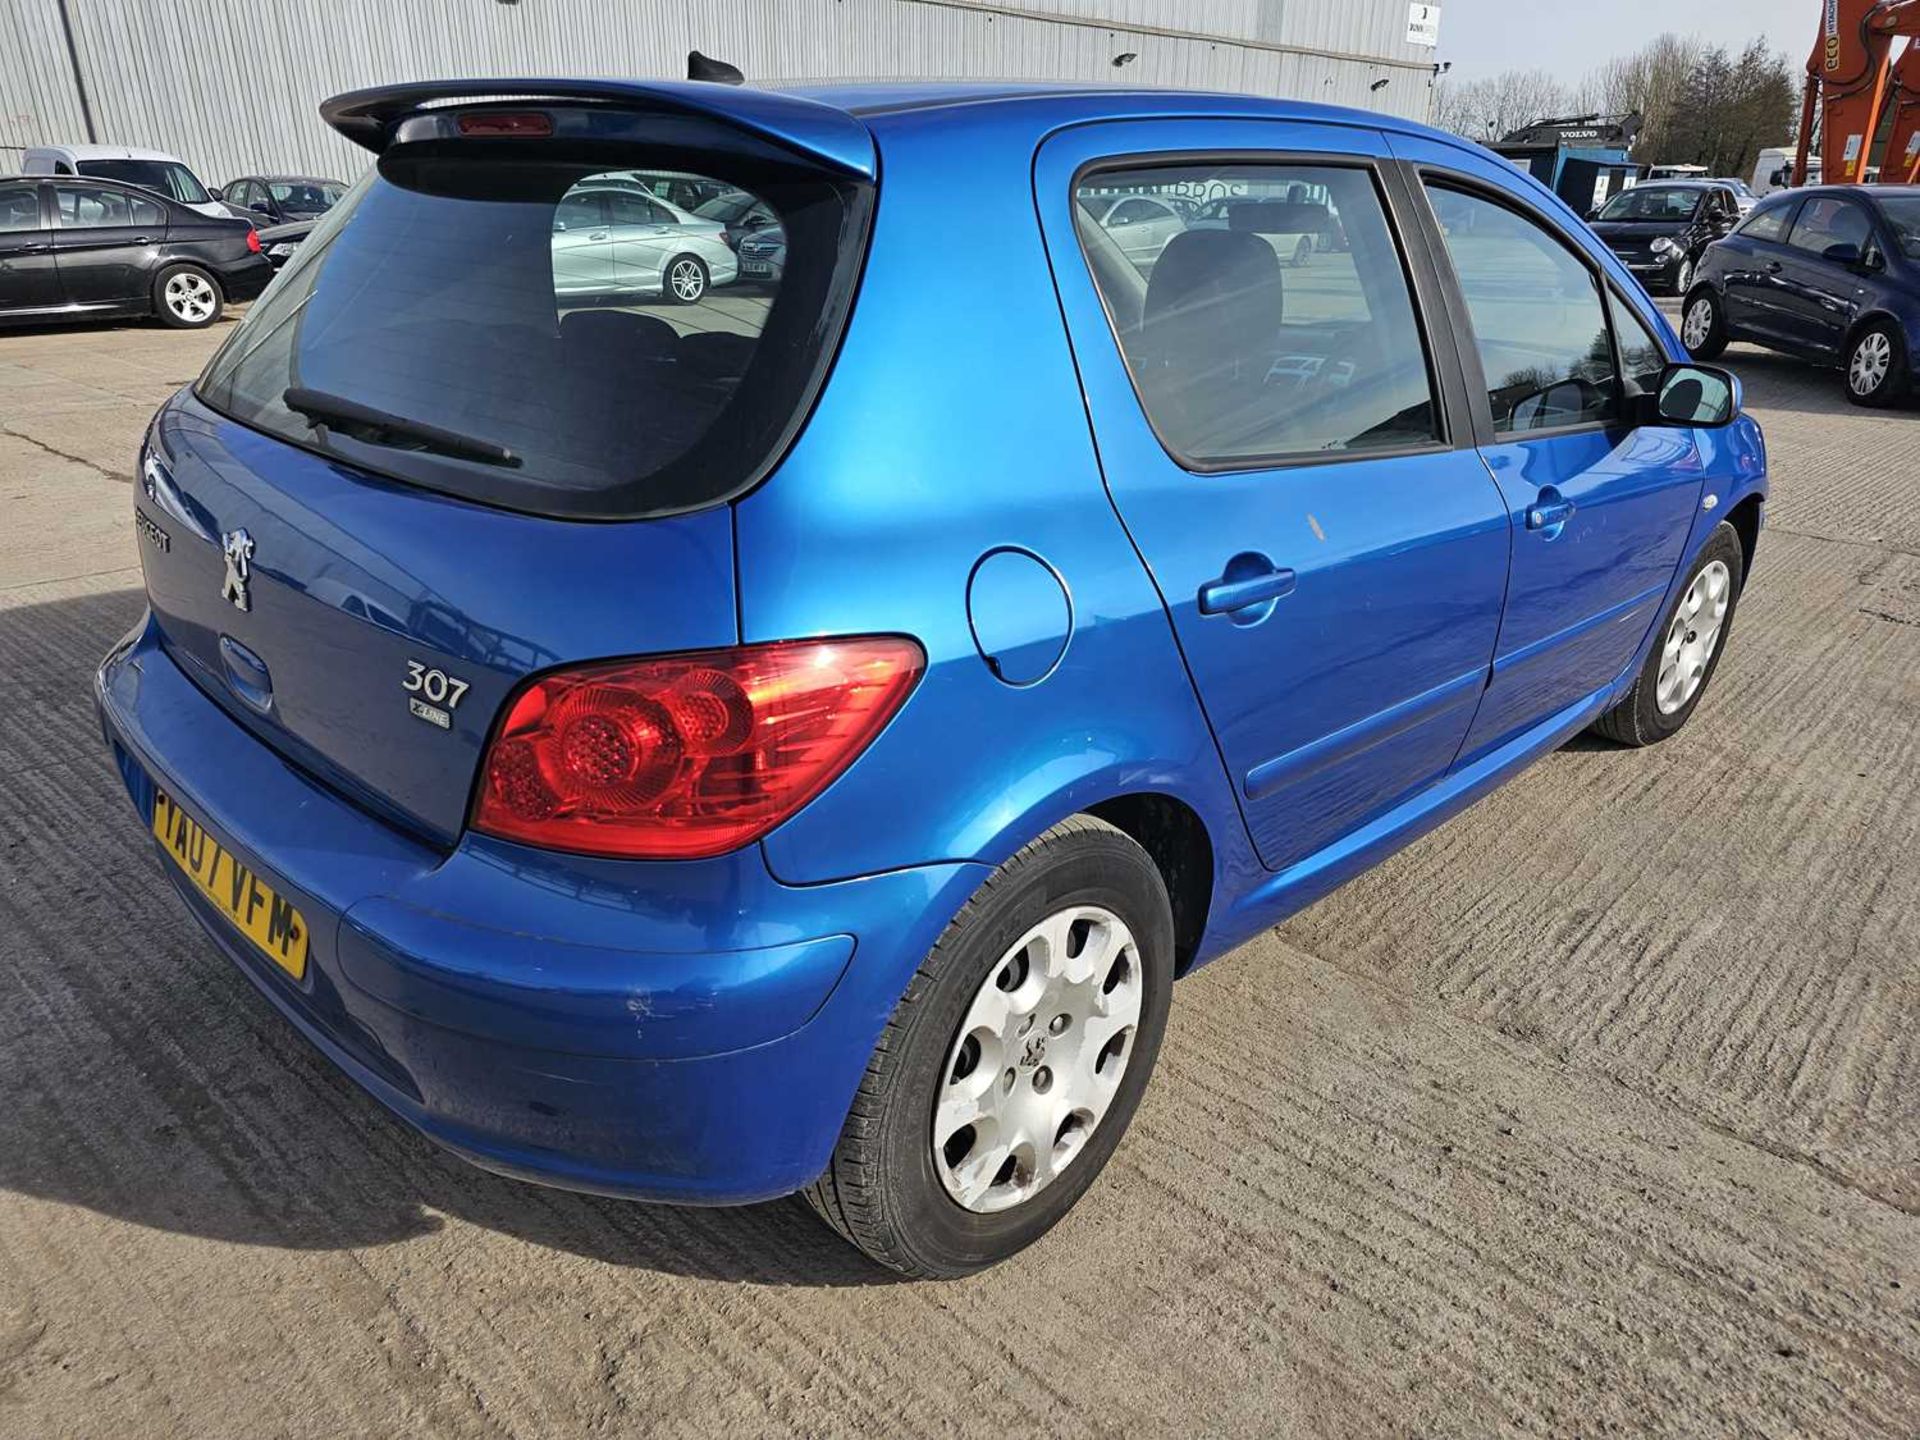 2007 Peugeot 307 X-line, 5 Speed, A/C (Reg. Docs. & Service History Available, Tested 07/24) - Image 7 of 28